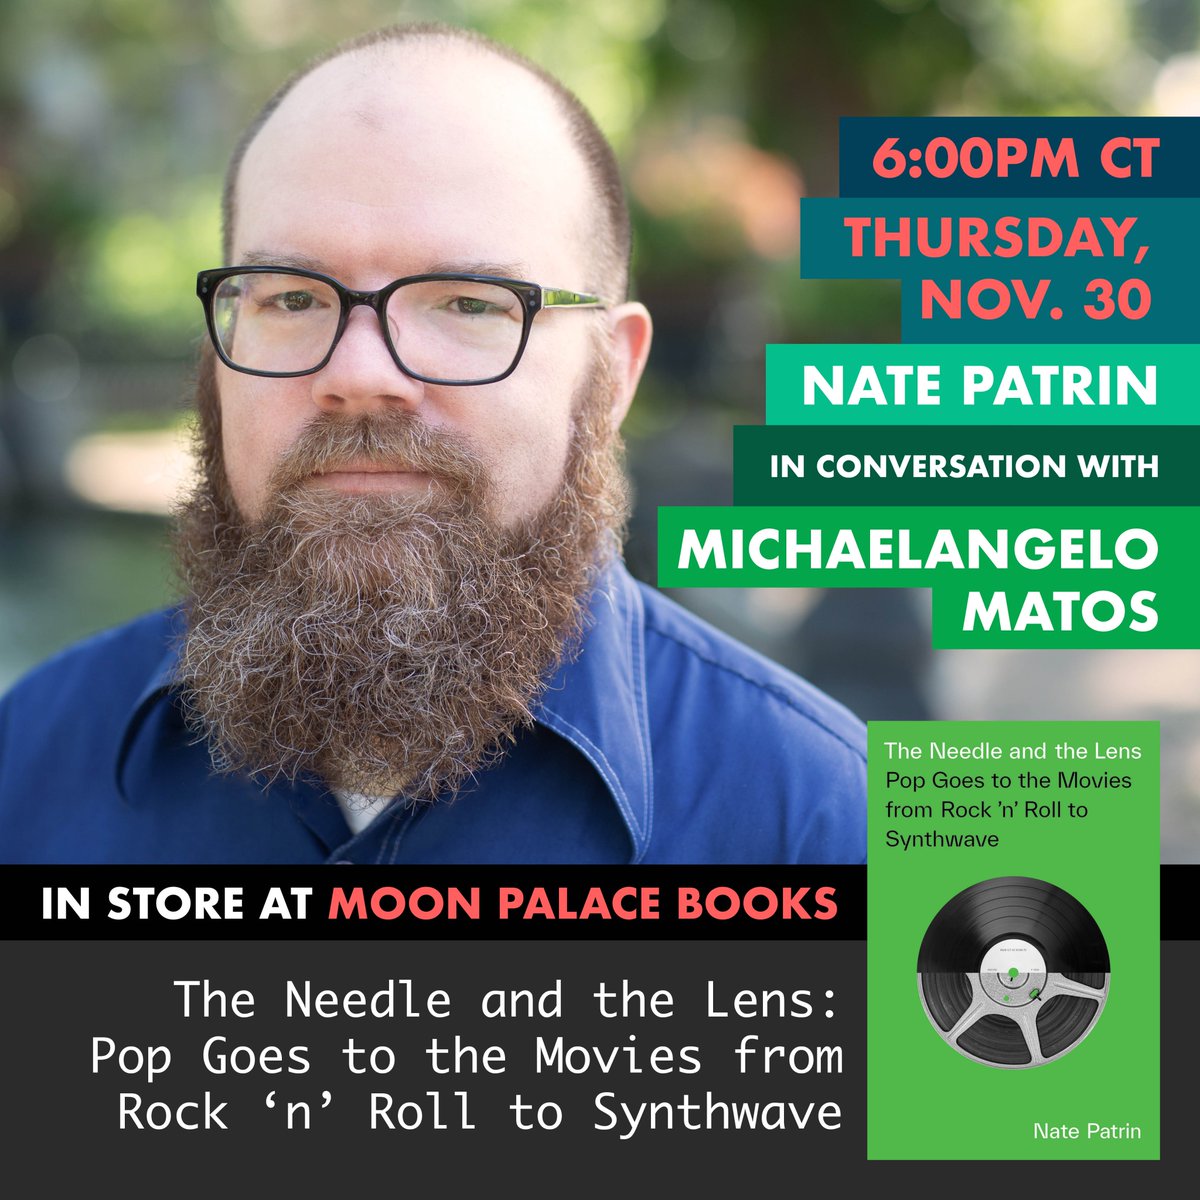 What movie does the song 'Sounds of Silence' make you think of? Next week: Nate Patrin in conversation with Michaelangelo Matos at @MoonPalaceBooks about his new book on pop music at the movies, 6pm Central, 11/30. moonpalacebooks.com/events